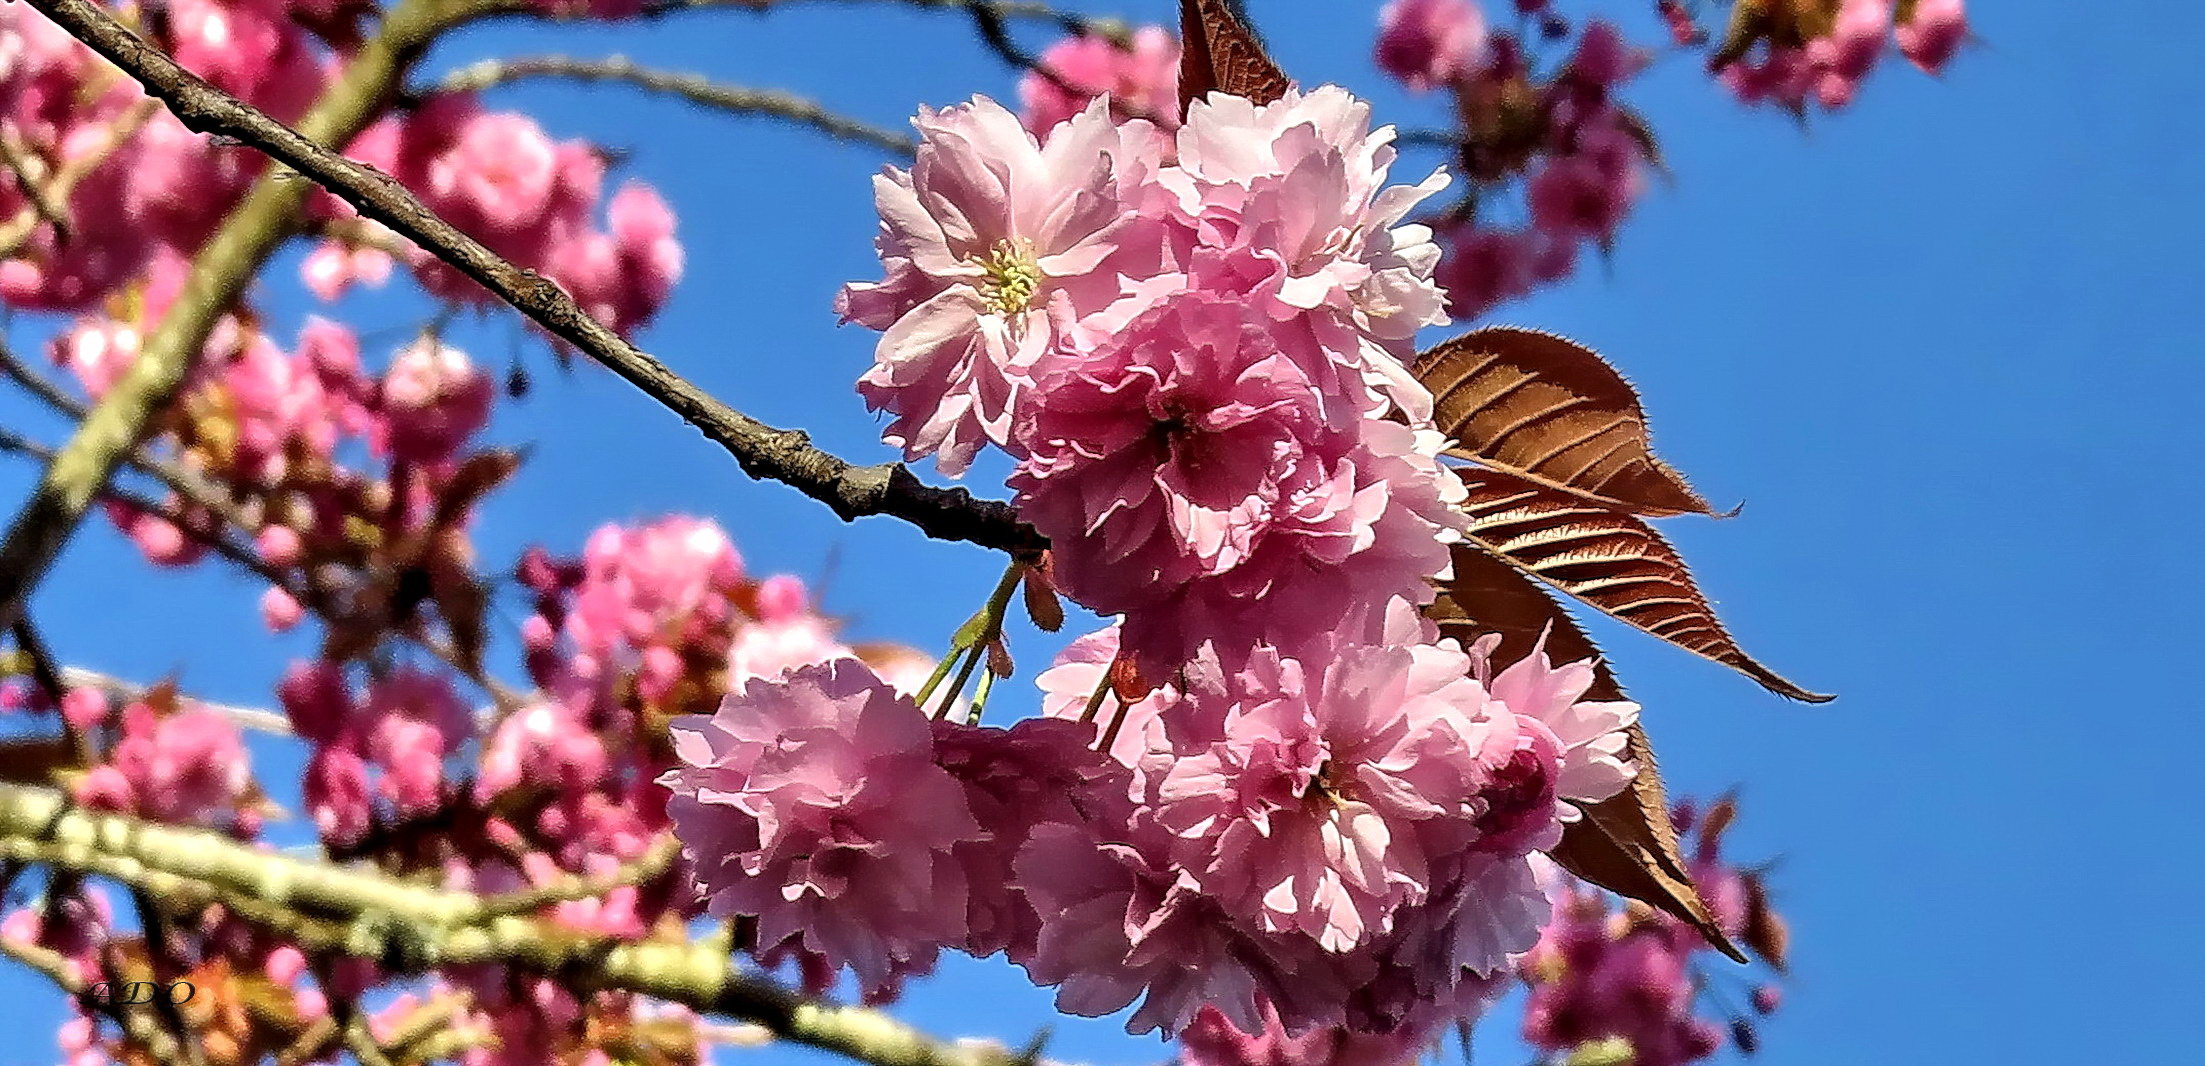 the Last Blossoms